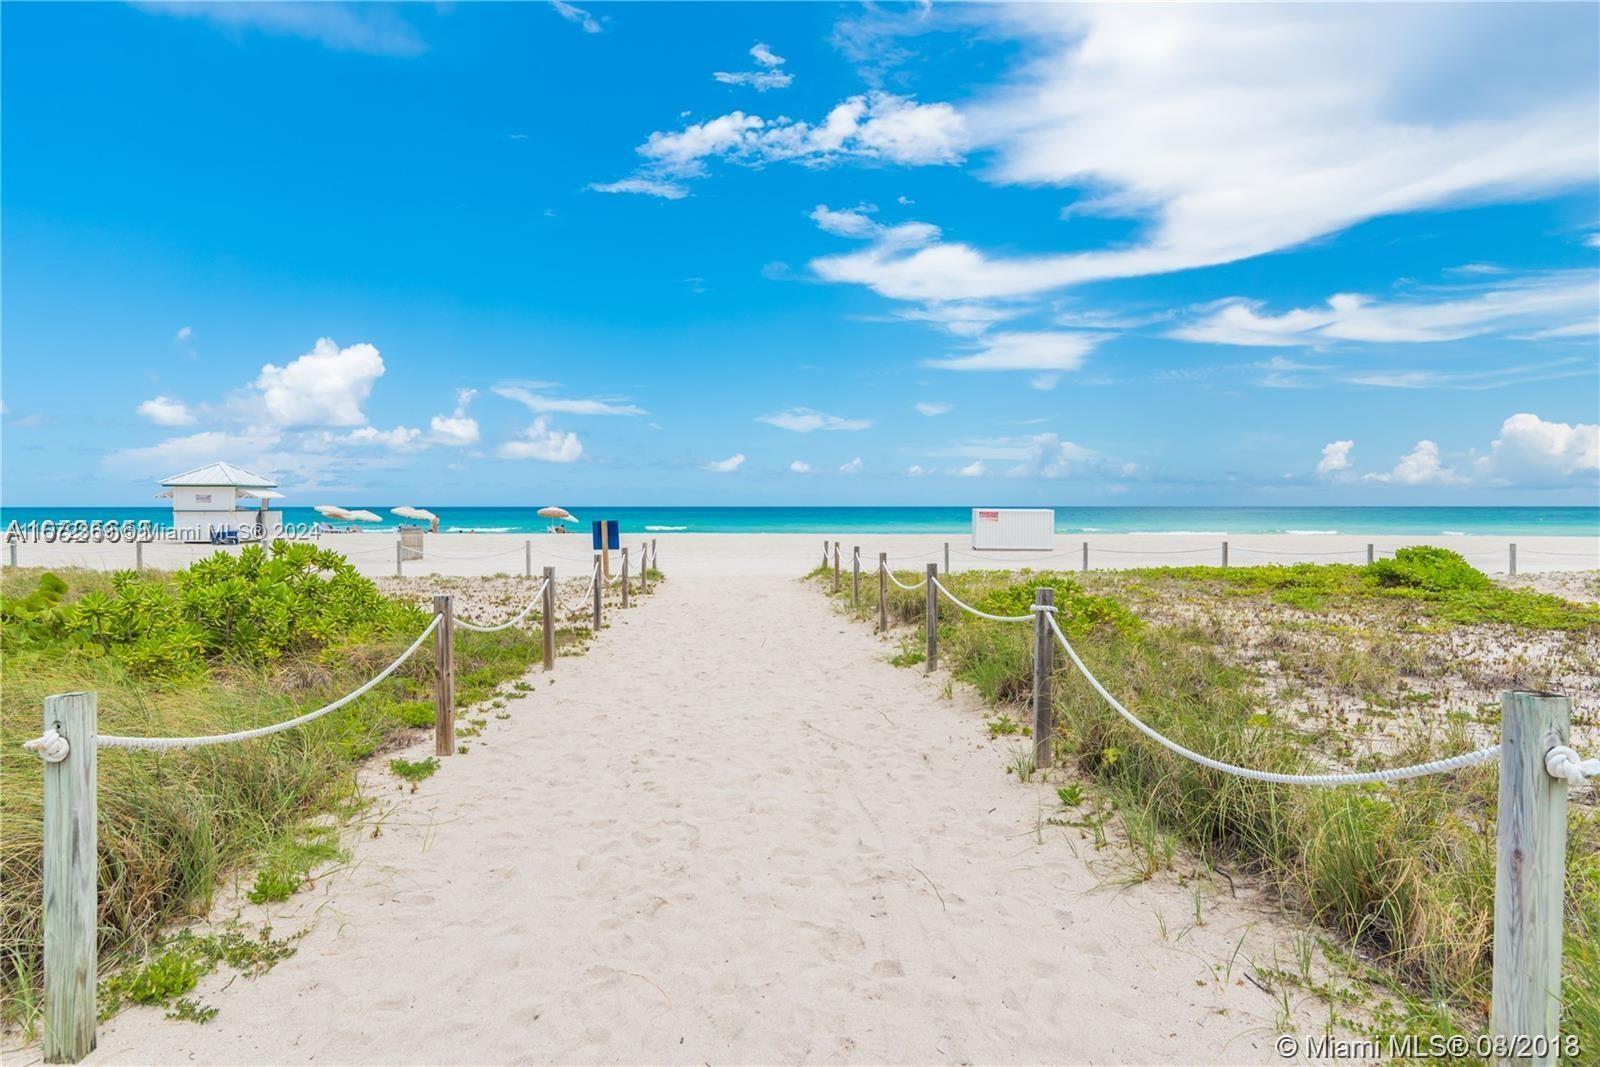 Amazing 2 Bed/2 Bath unit, completely renovated. Designed by a well-known decorator and artist. Beach front building, pool, gym, sauna, bbq area, children's playground, beach service, the best location in Miami Beach on the ocean.